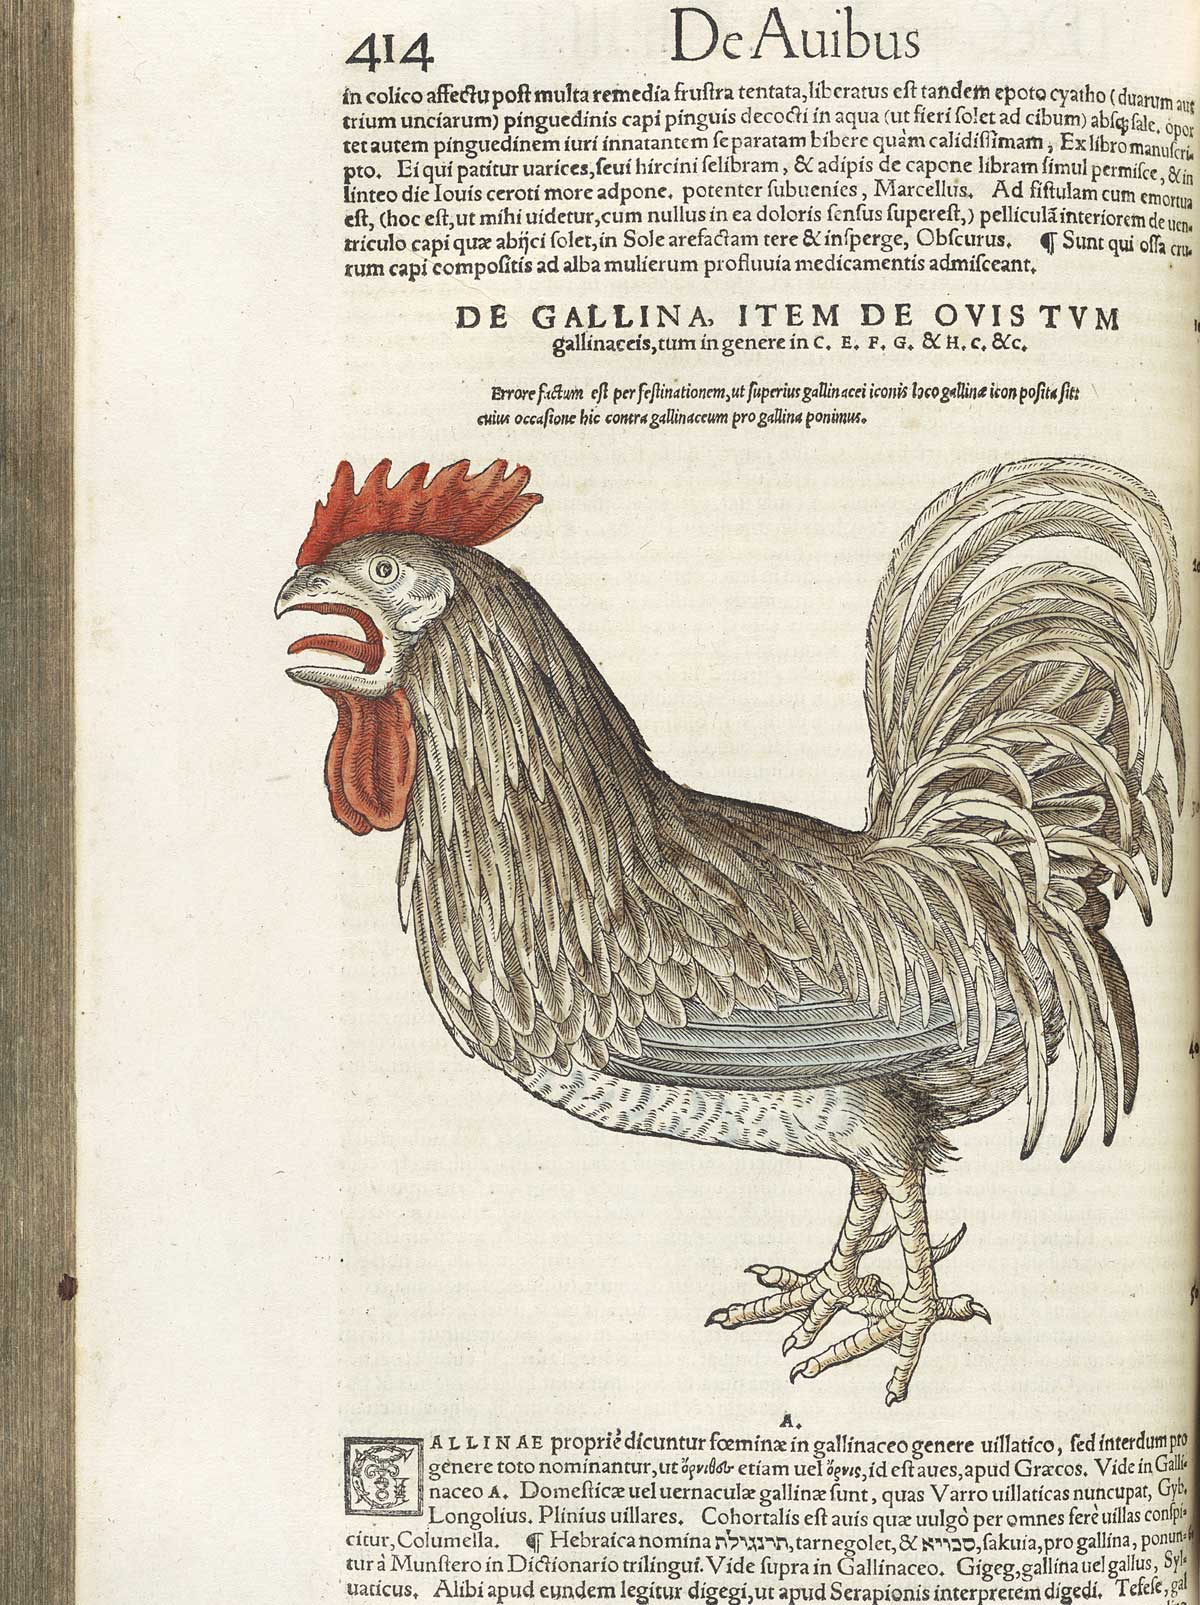 Page 414 from volume 3 of Conrad Gessner's Conradi Gesneri medici Tigurini Historiae animalium, featuring the colored woodcut of a crowing rooster.